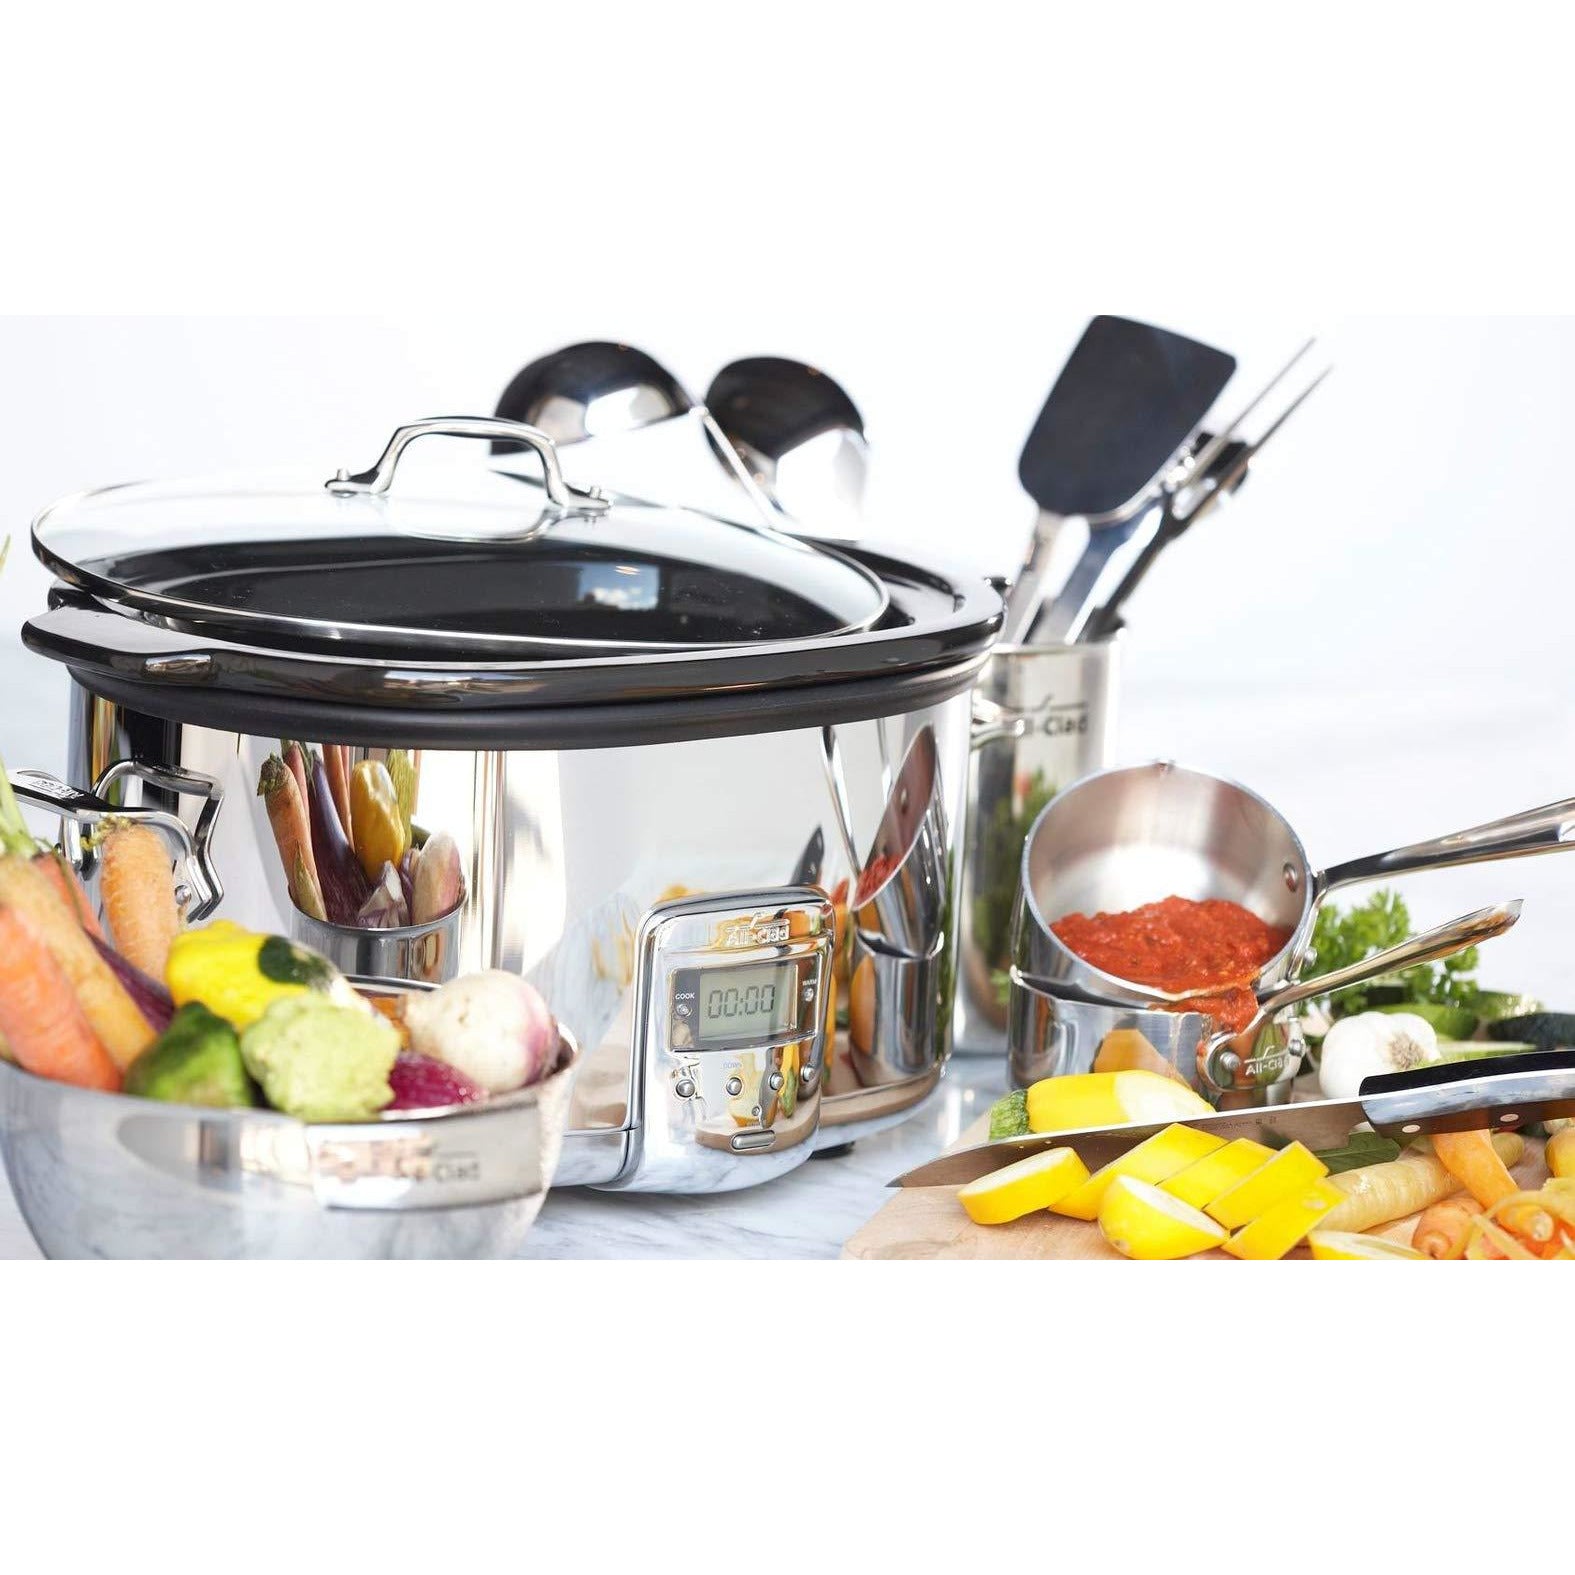 All-Clad Electrics Stainless Steel and Ceramic Slow Cooker with Insert and  Lid 6.5 Quart Nonstick 320 Watts Oval Shaped, Programmable, Dishwasher Safe